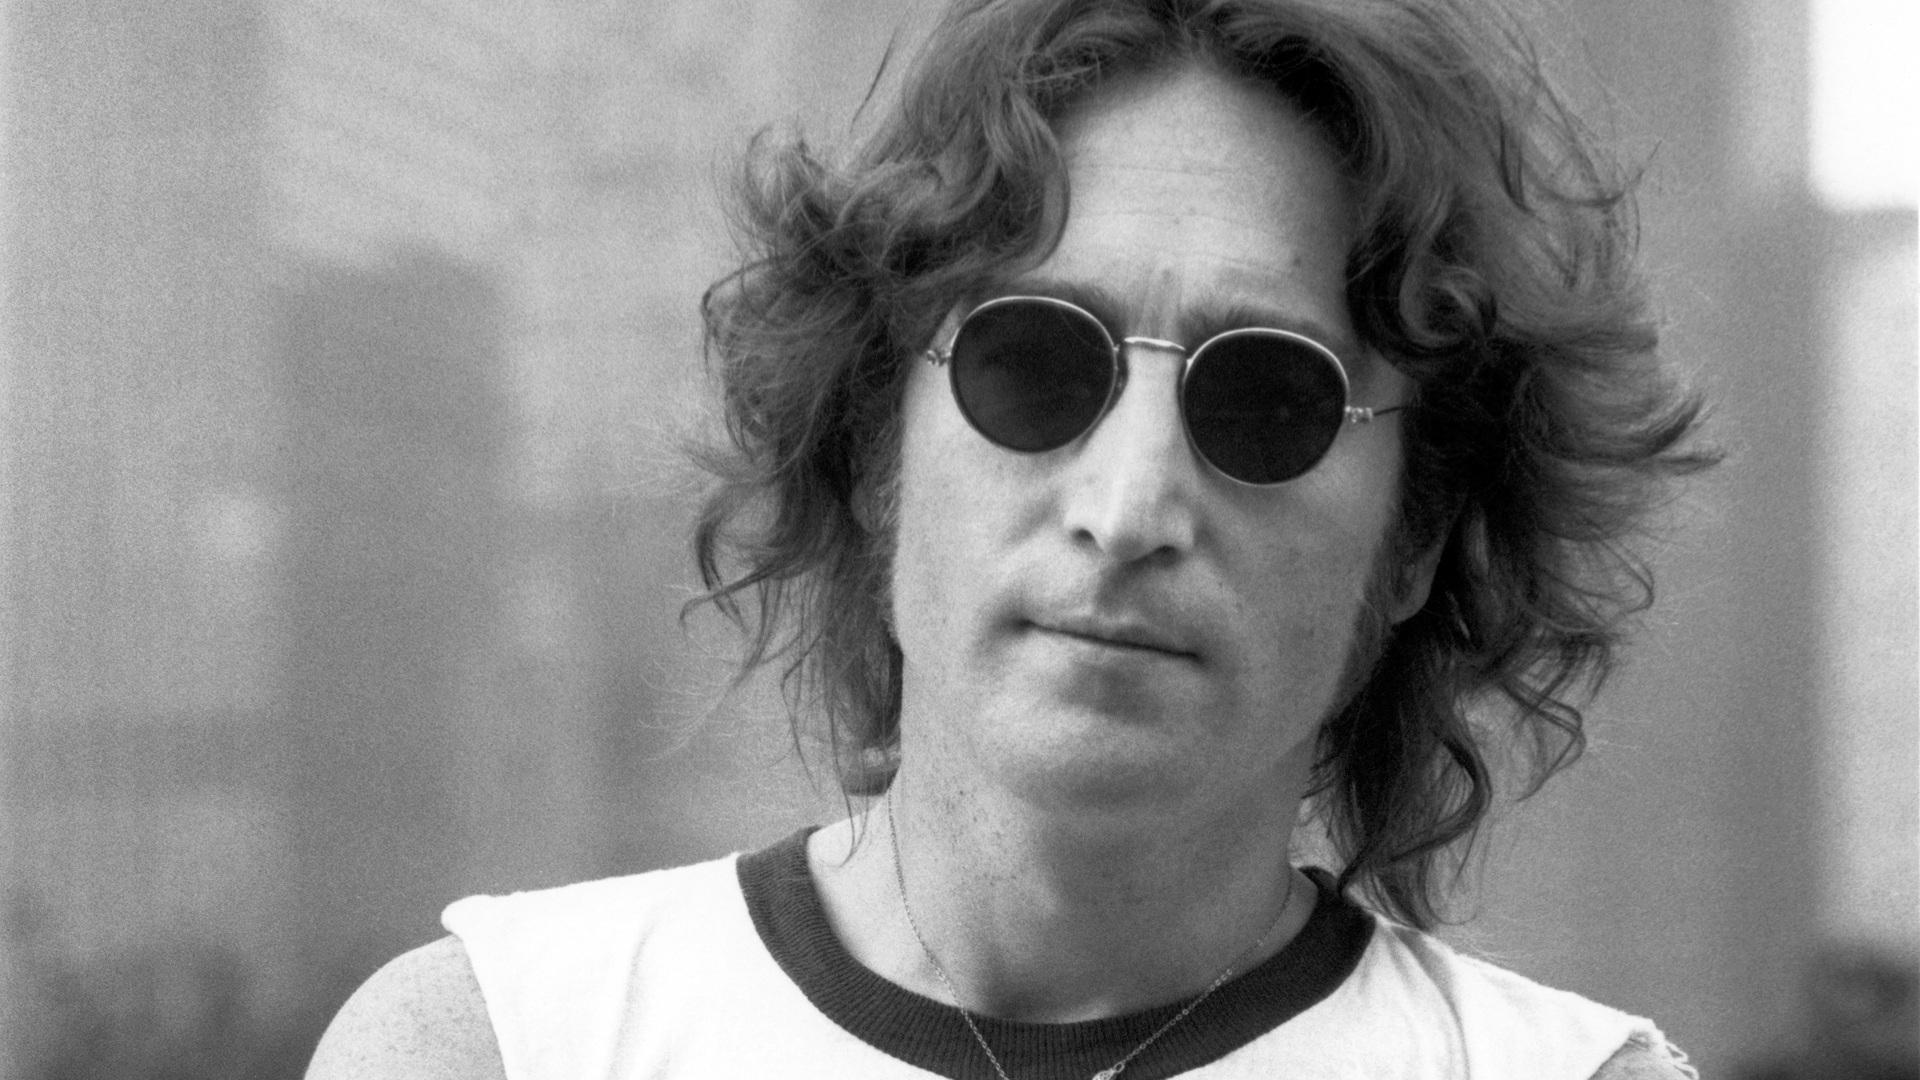 John Lennon Wallpapers Images Photos Pictures Backgrounds